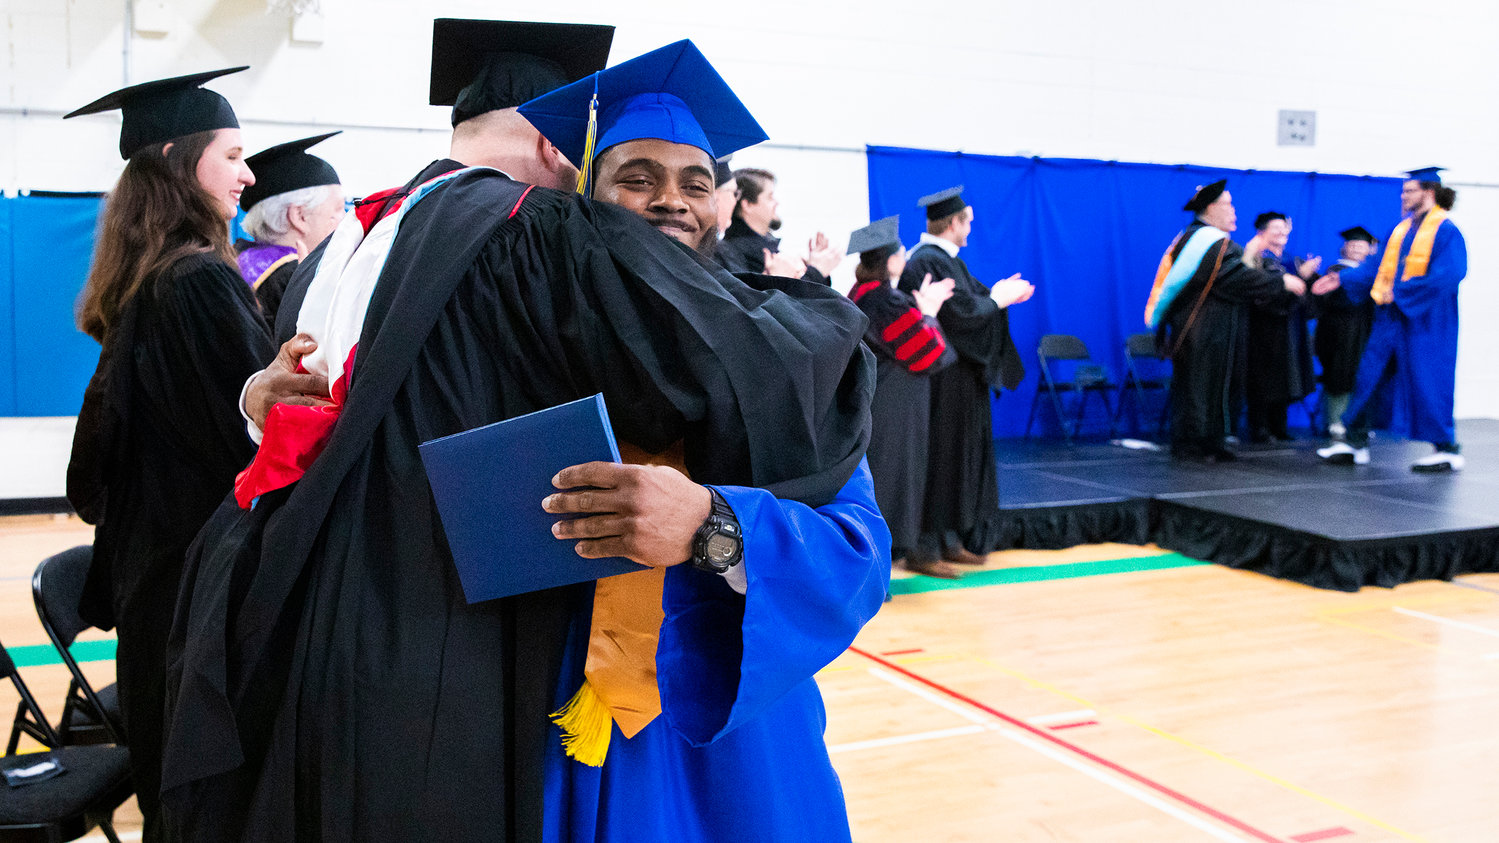 Anthony Smith smiles and receives an embrace after getting his diploma on stage during a graduation ceremony for Centralia College graduates held at the Green Hill School on Wednesday in Chehalis.